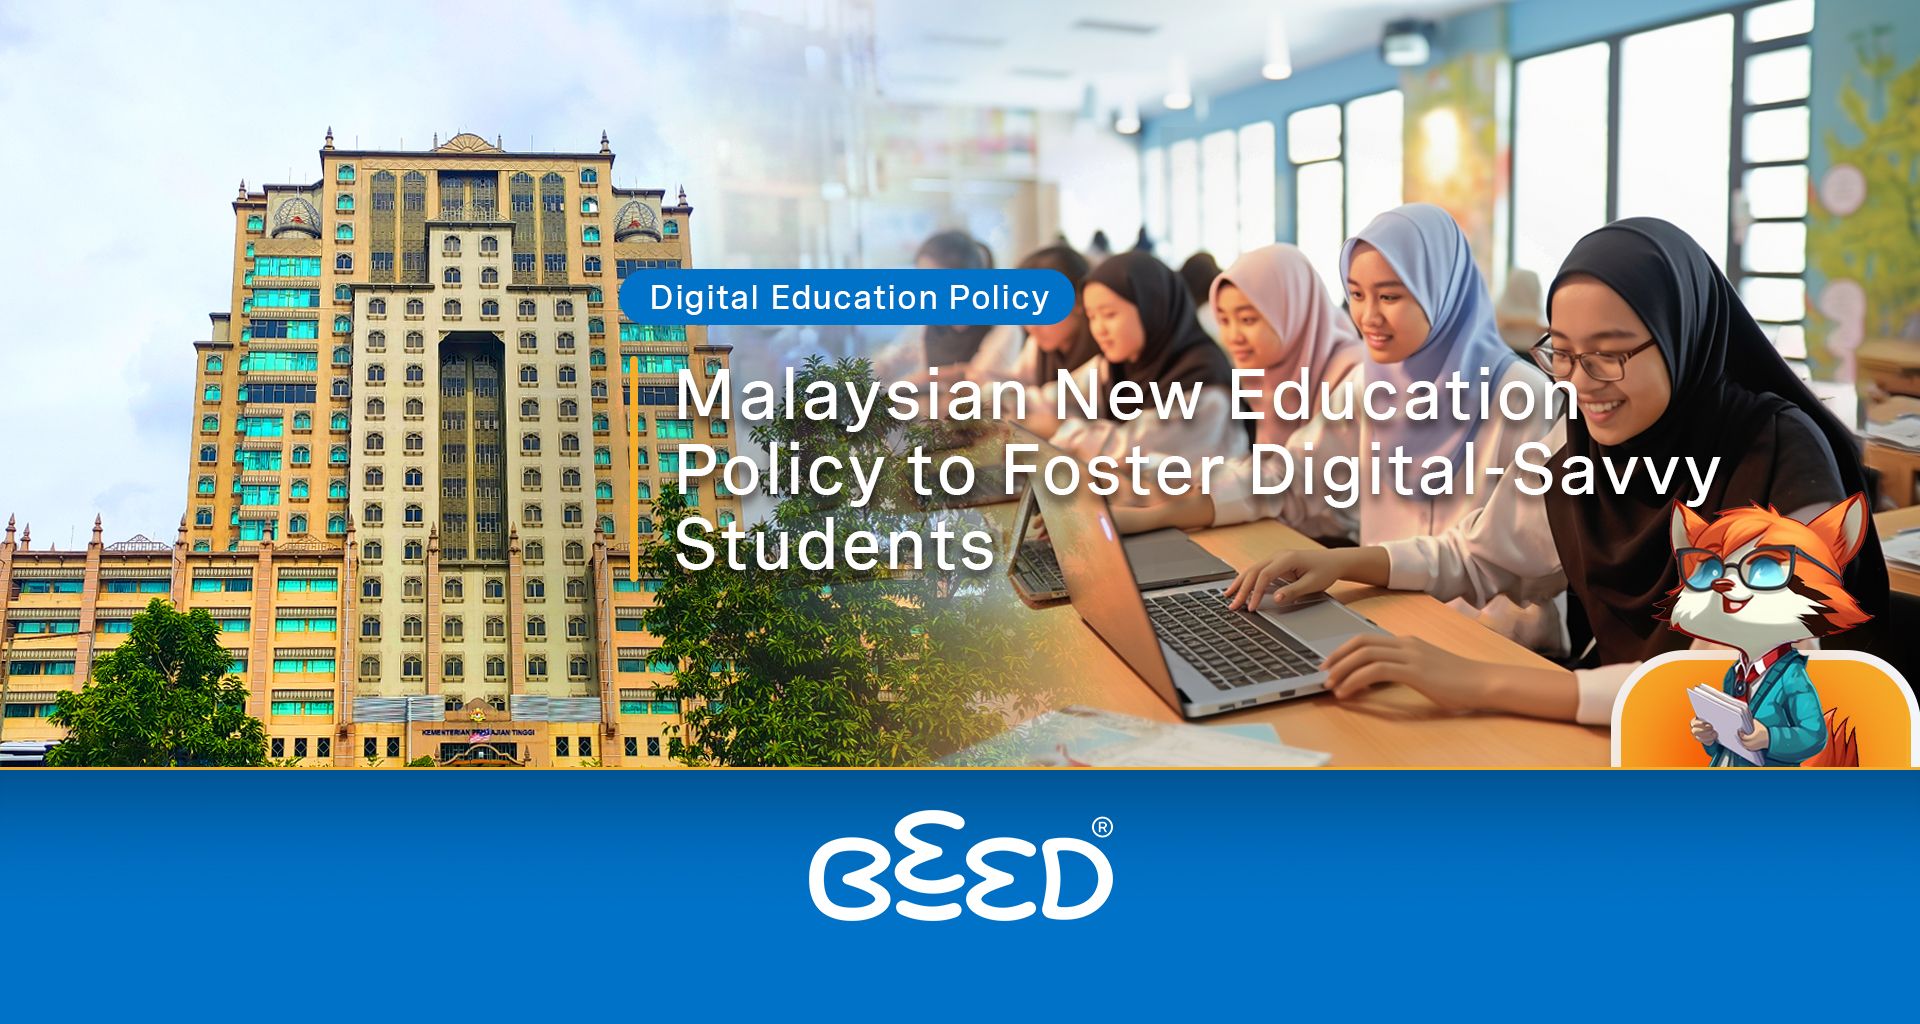 Malaysian New Education Policy to Foster Digital-Savvy Students